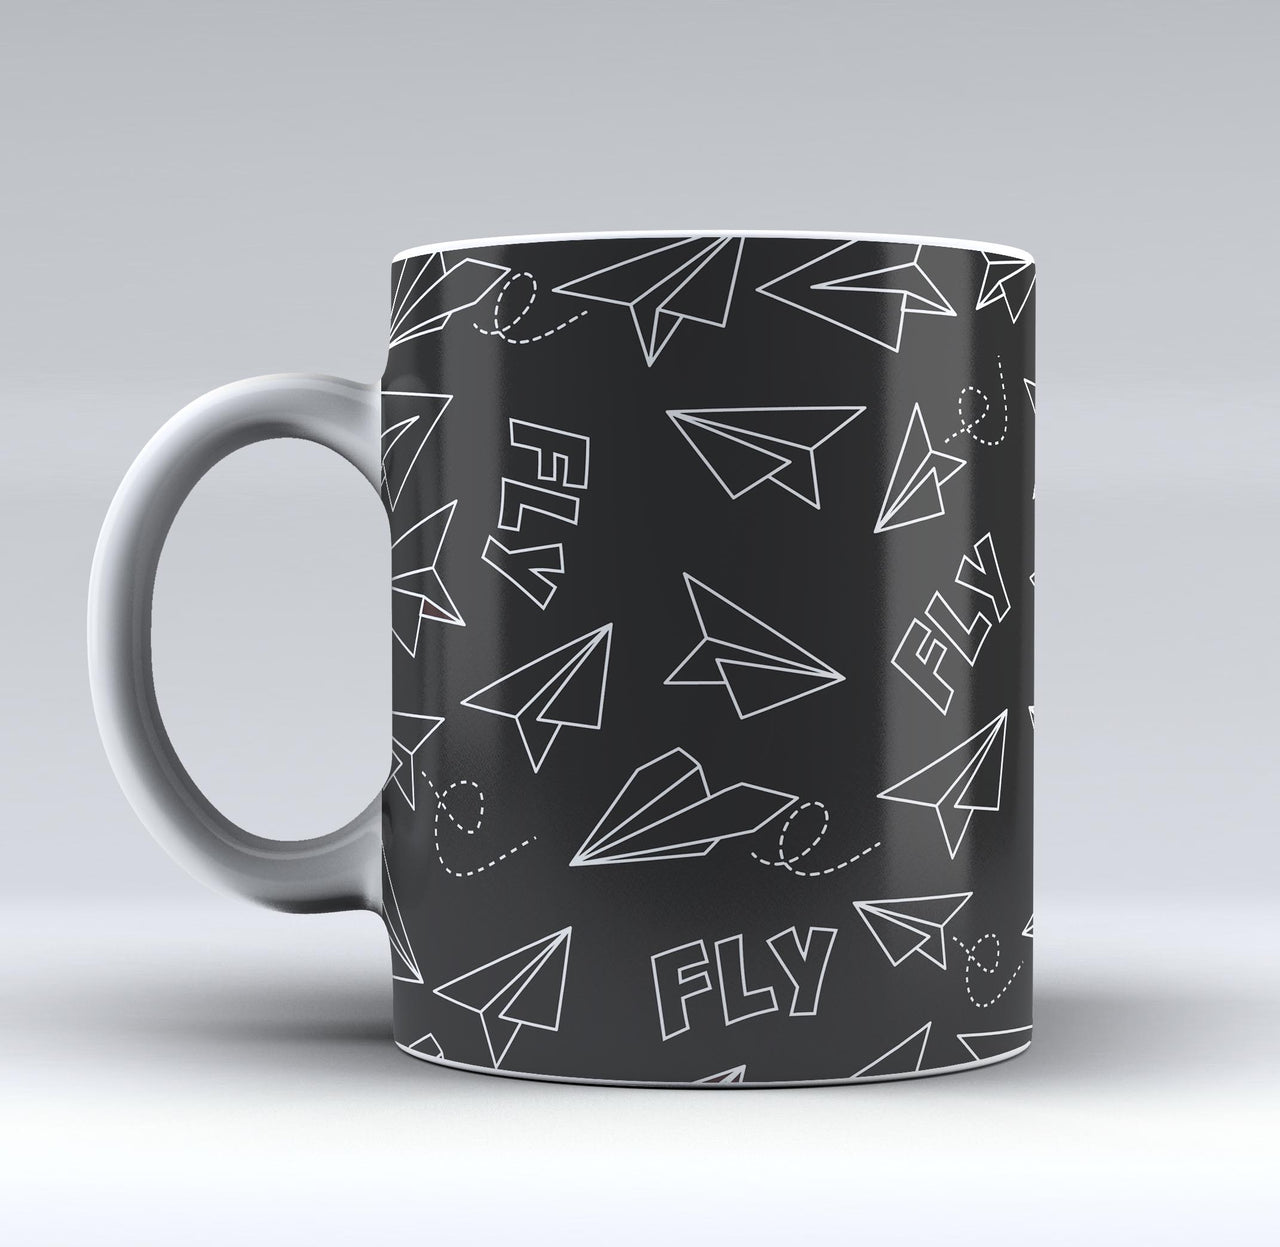 Paper Airplane & Fly Designed Mugs